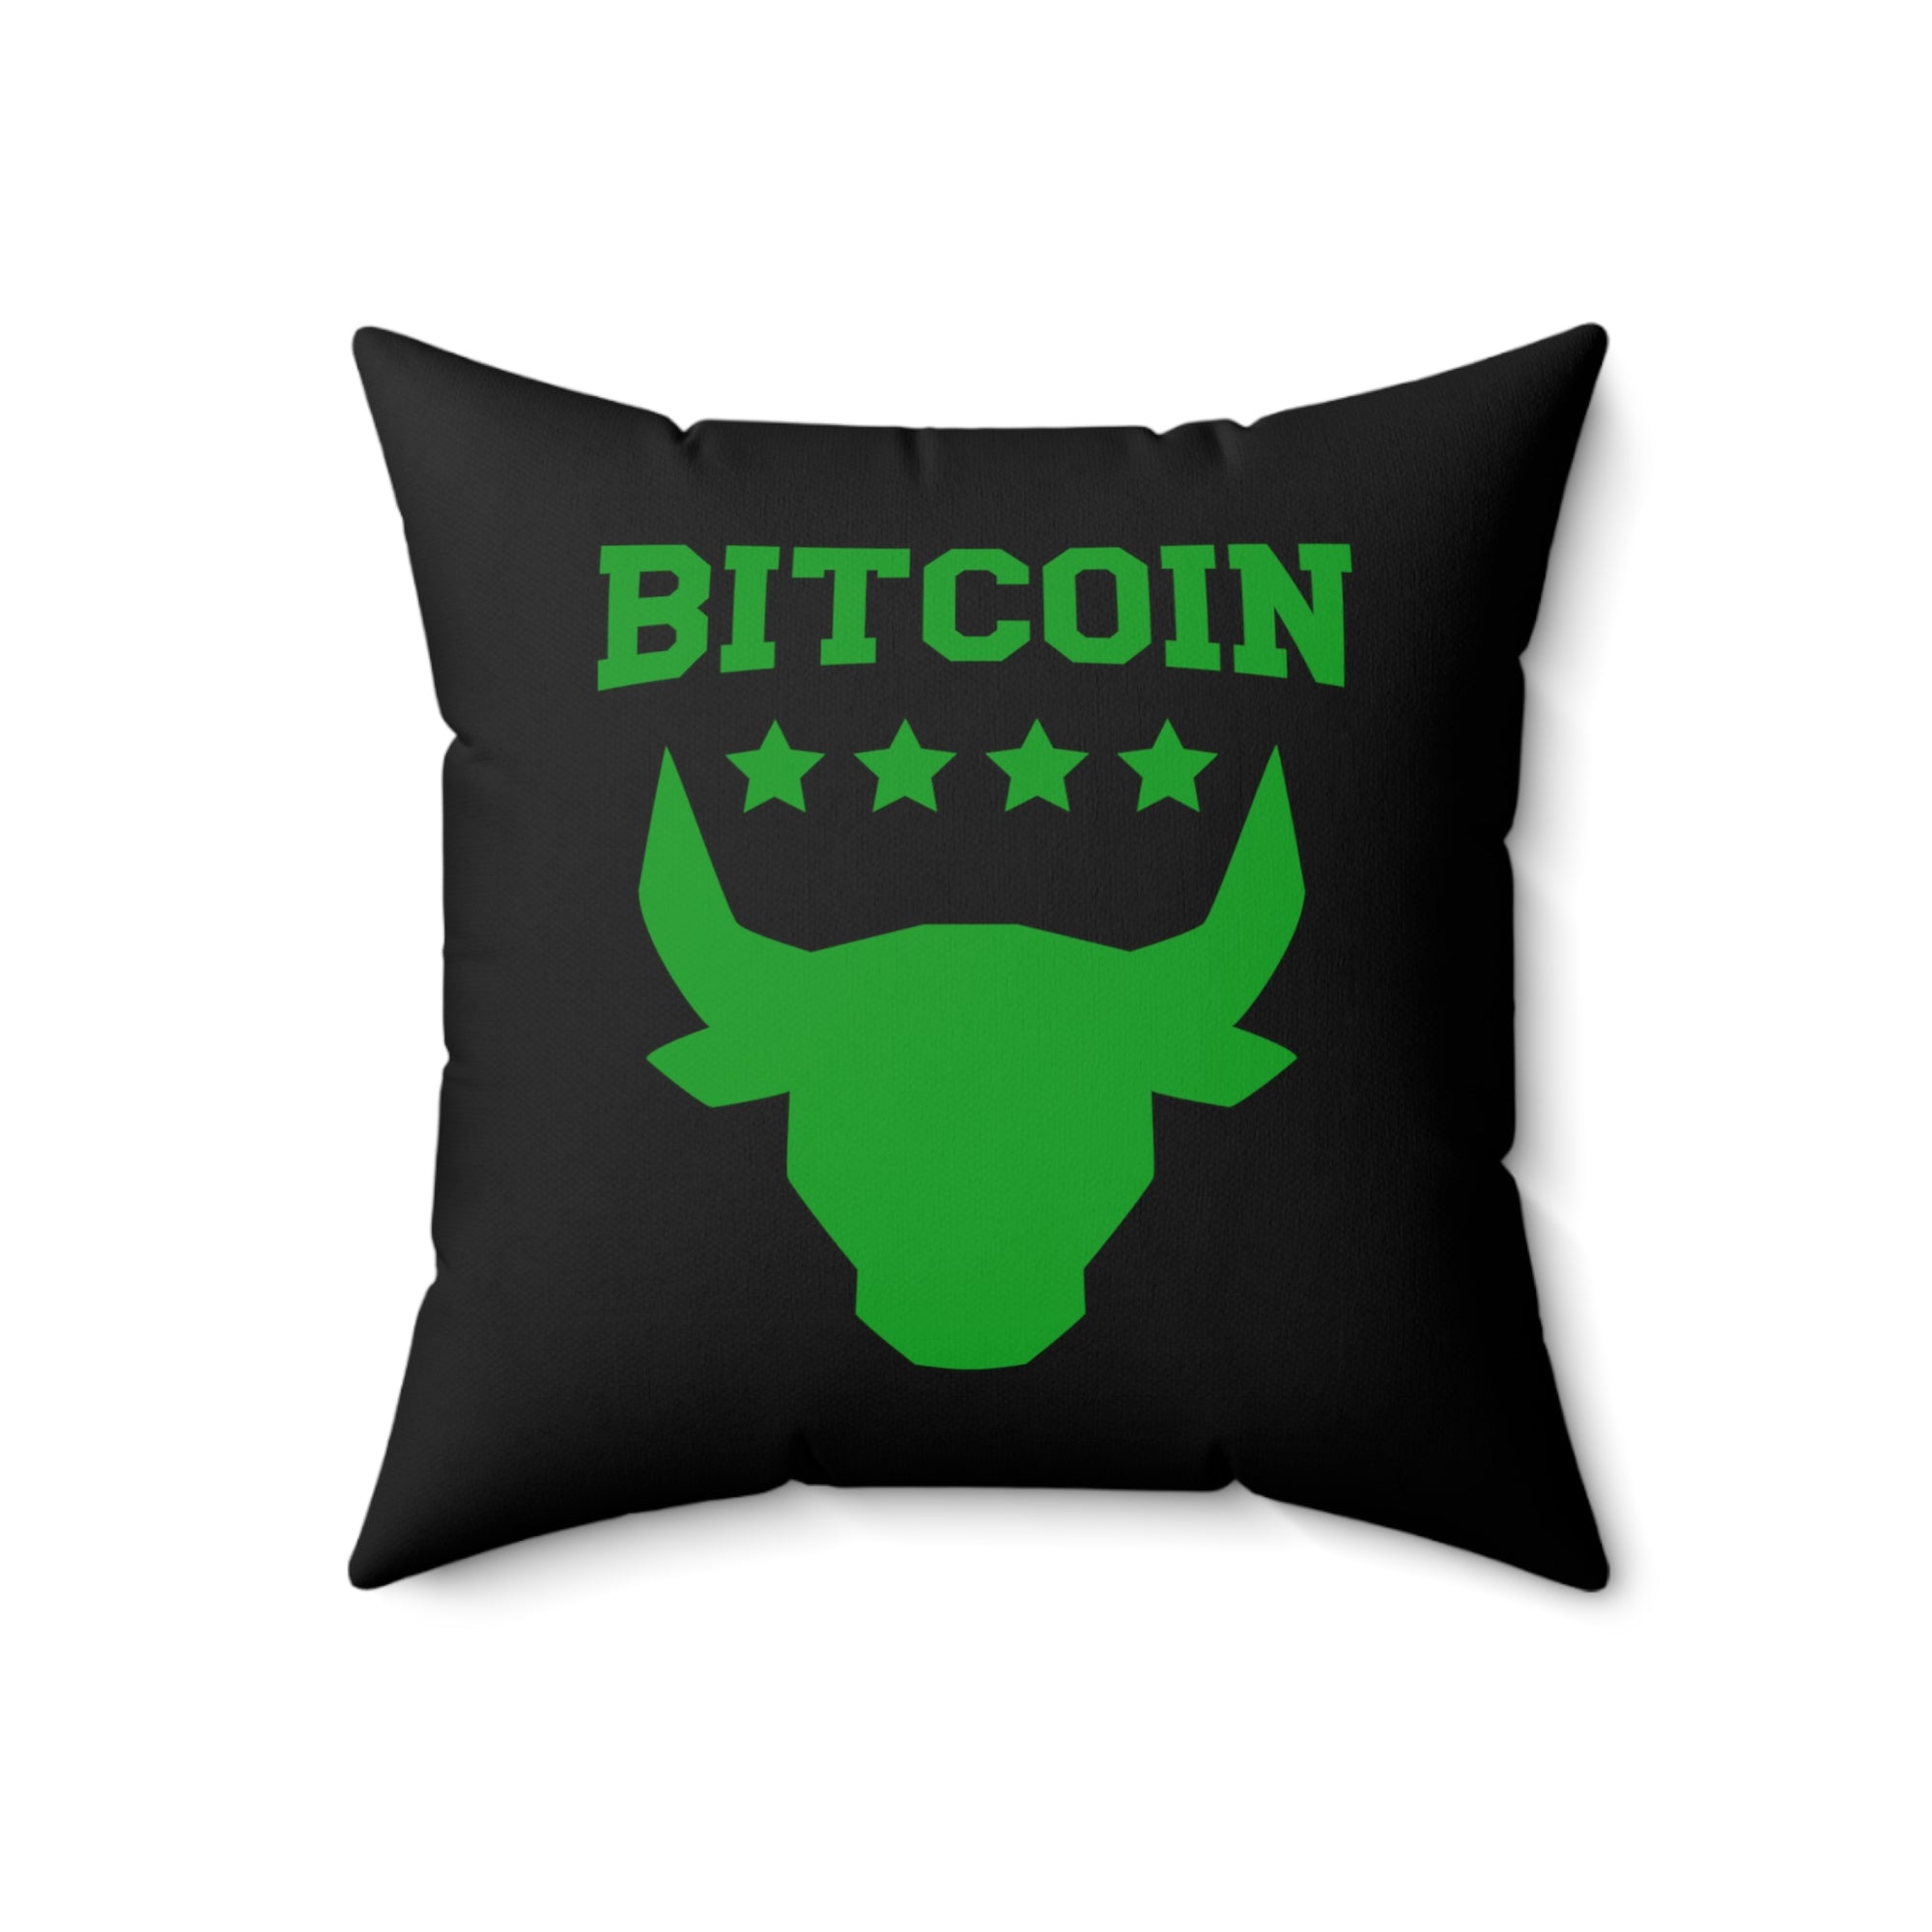 Cryptocurrency Gift Ideas - Bitcoin Bull Pillow Close Up View.